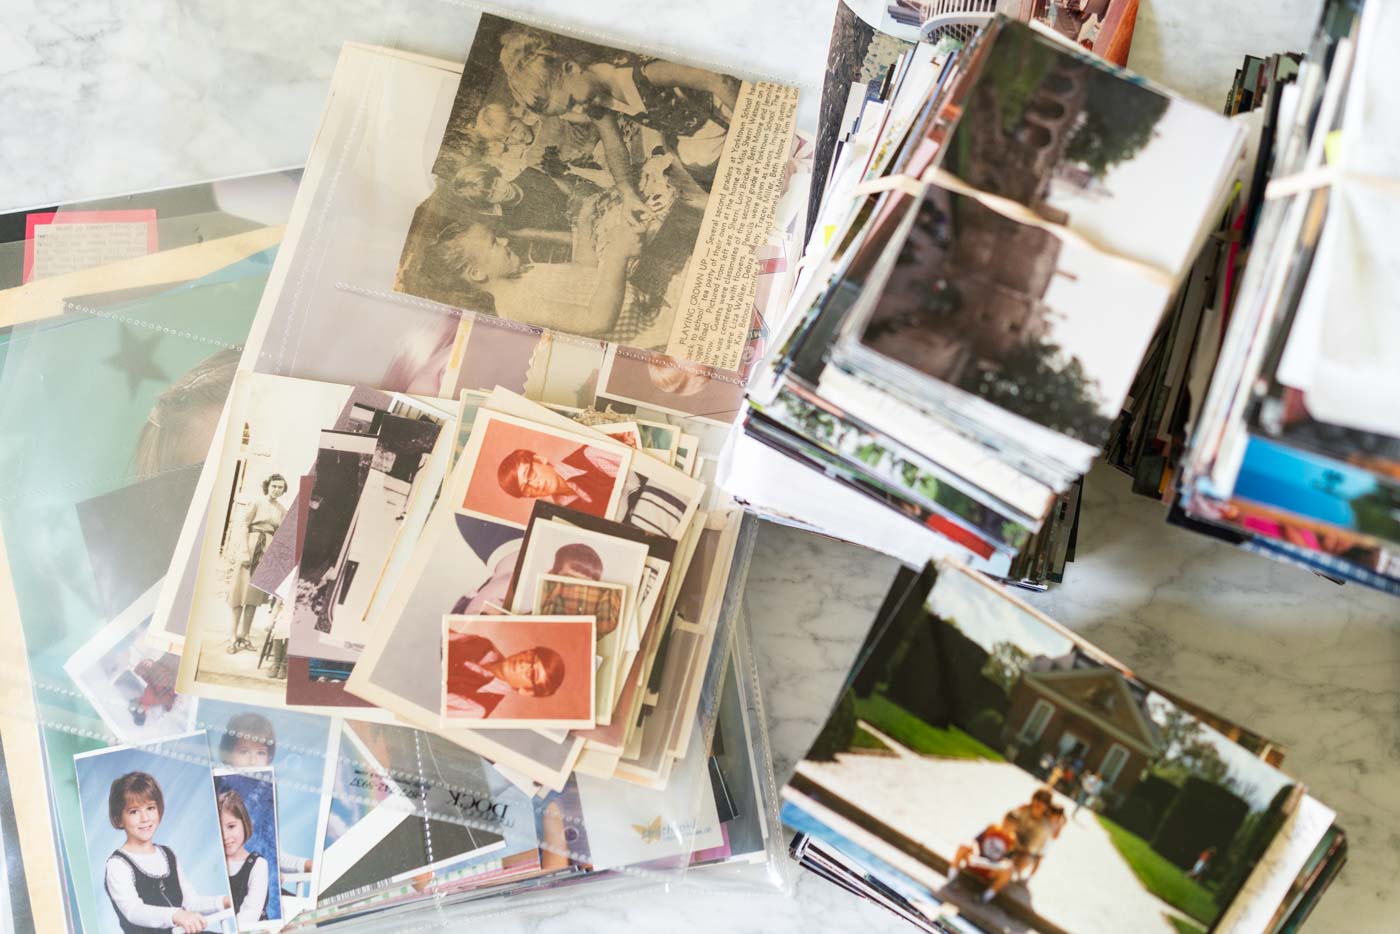 Piles of 4x6" photo prints and old school pictures in plastic photo sleeves